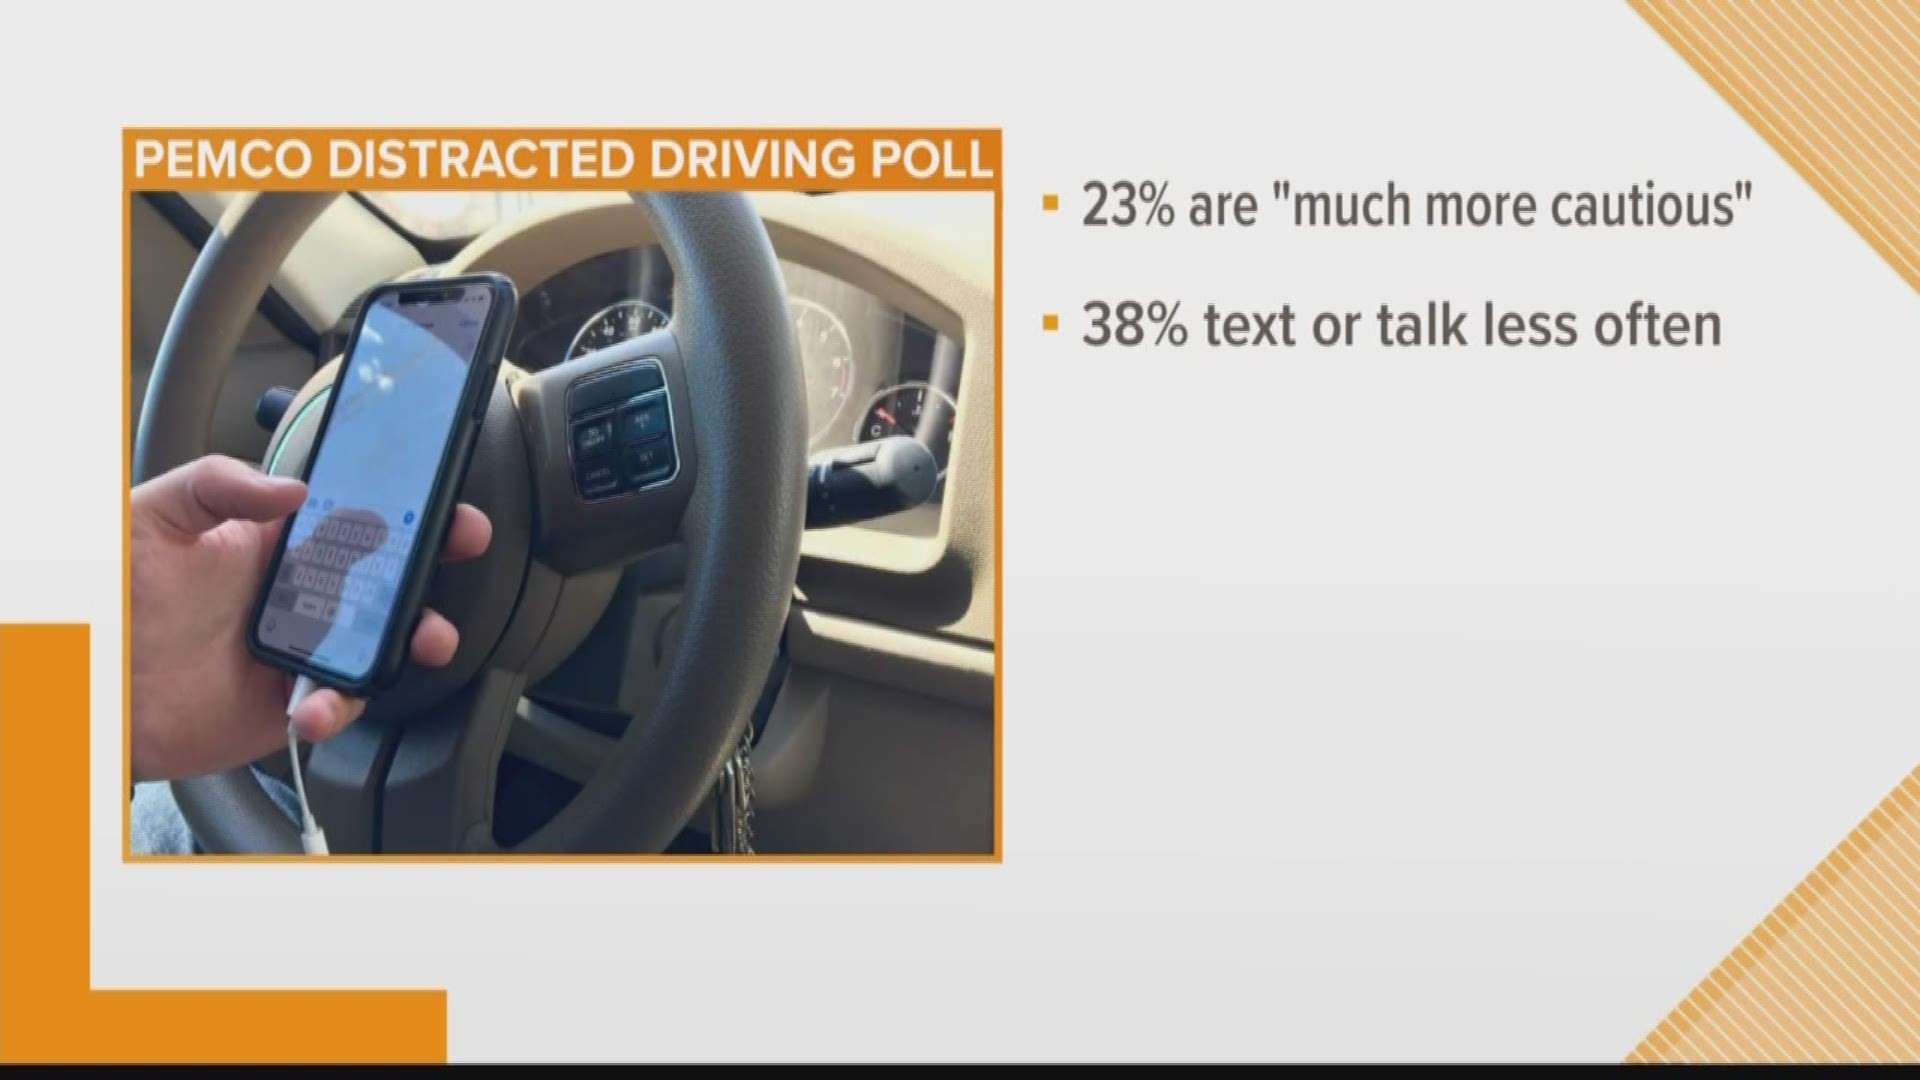 New poll suggests Washington drivers are more cautious behind the wheel after "E-DUI" law